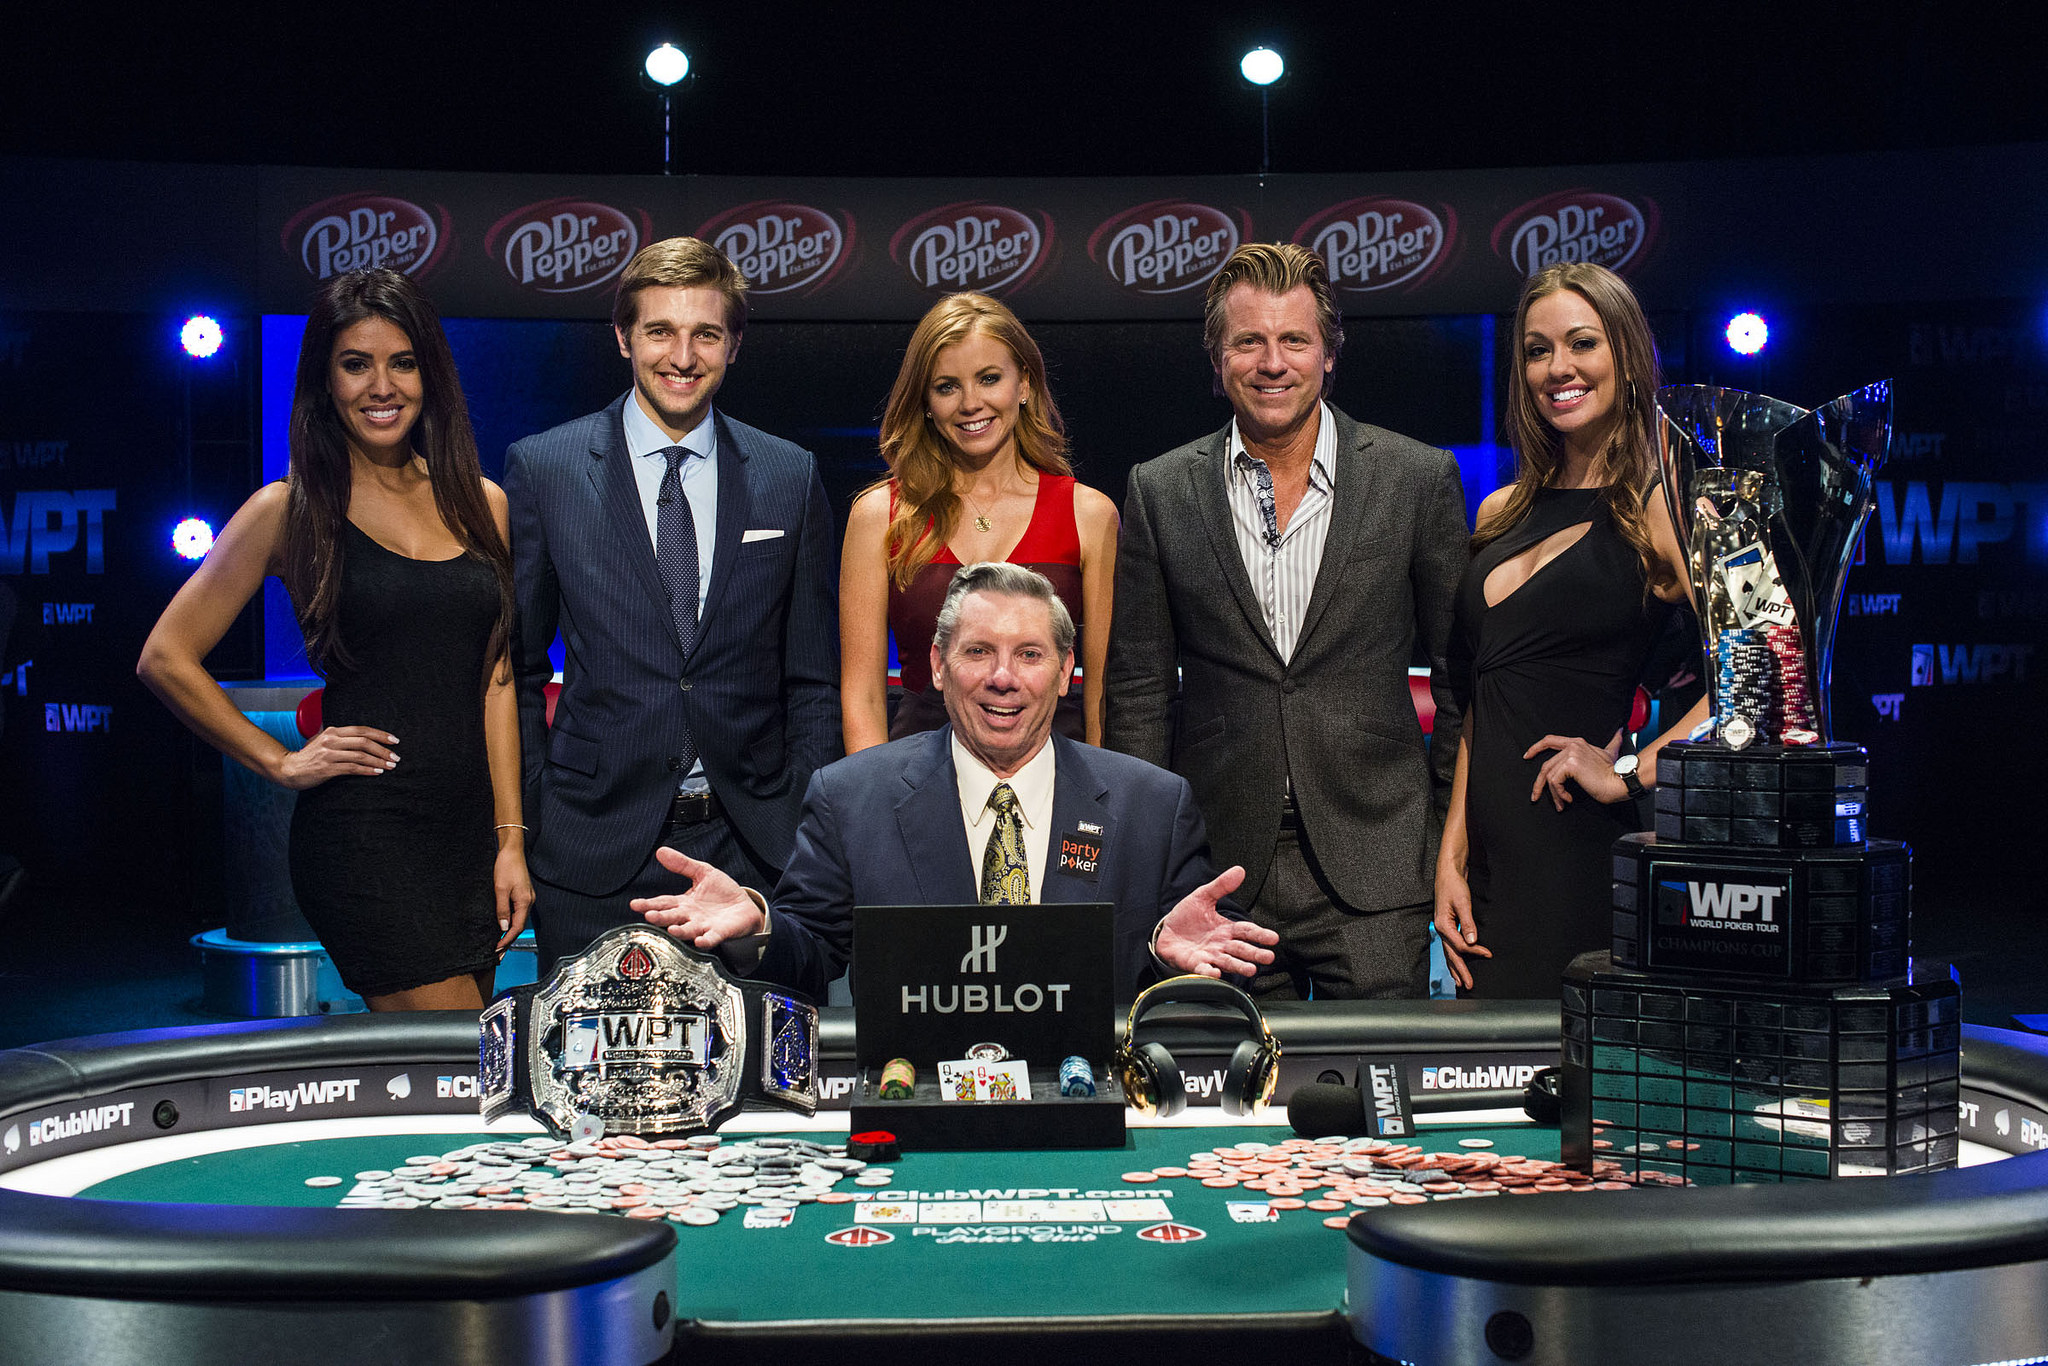 world poker tour cast and crew